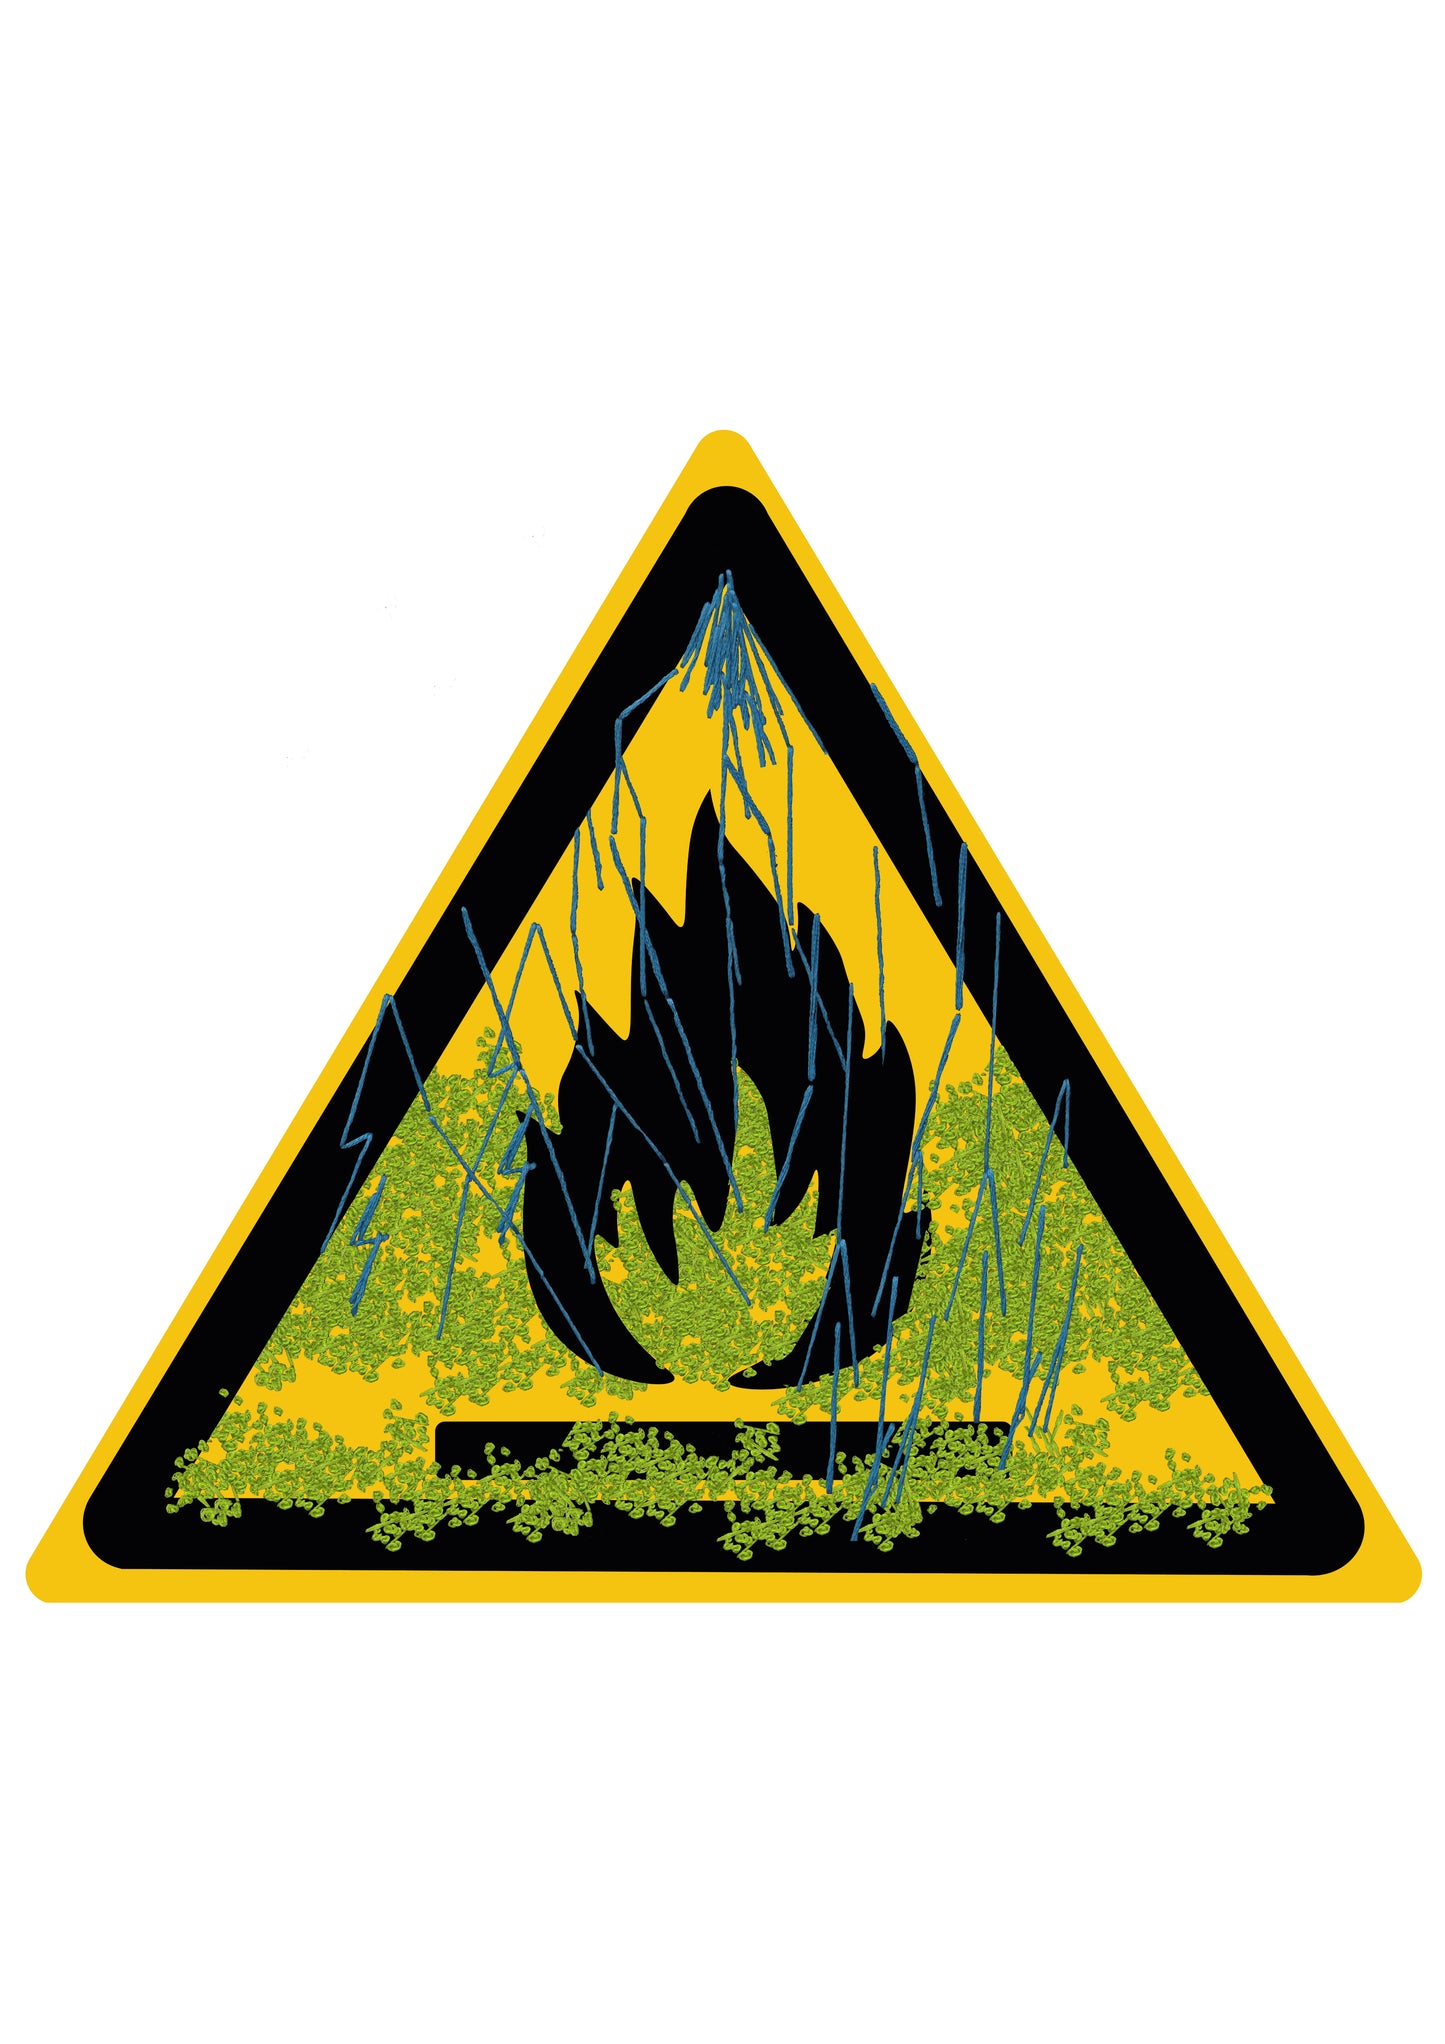 WARNING: Risk of Fire Pictogram By Nicole Chui